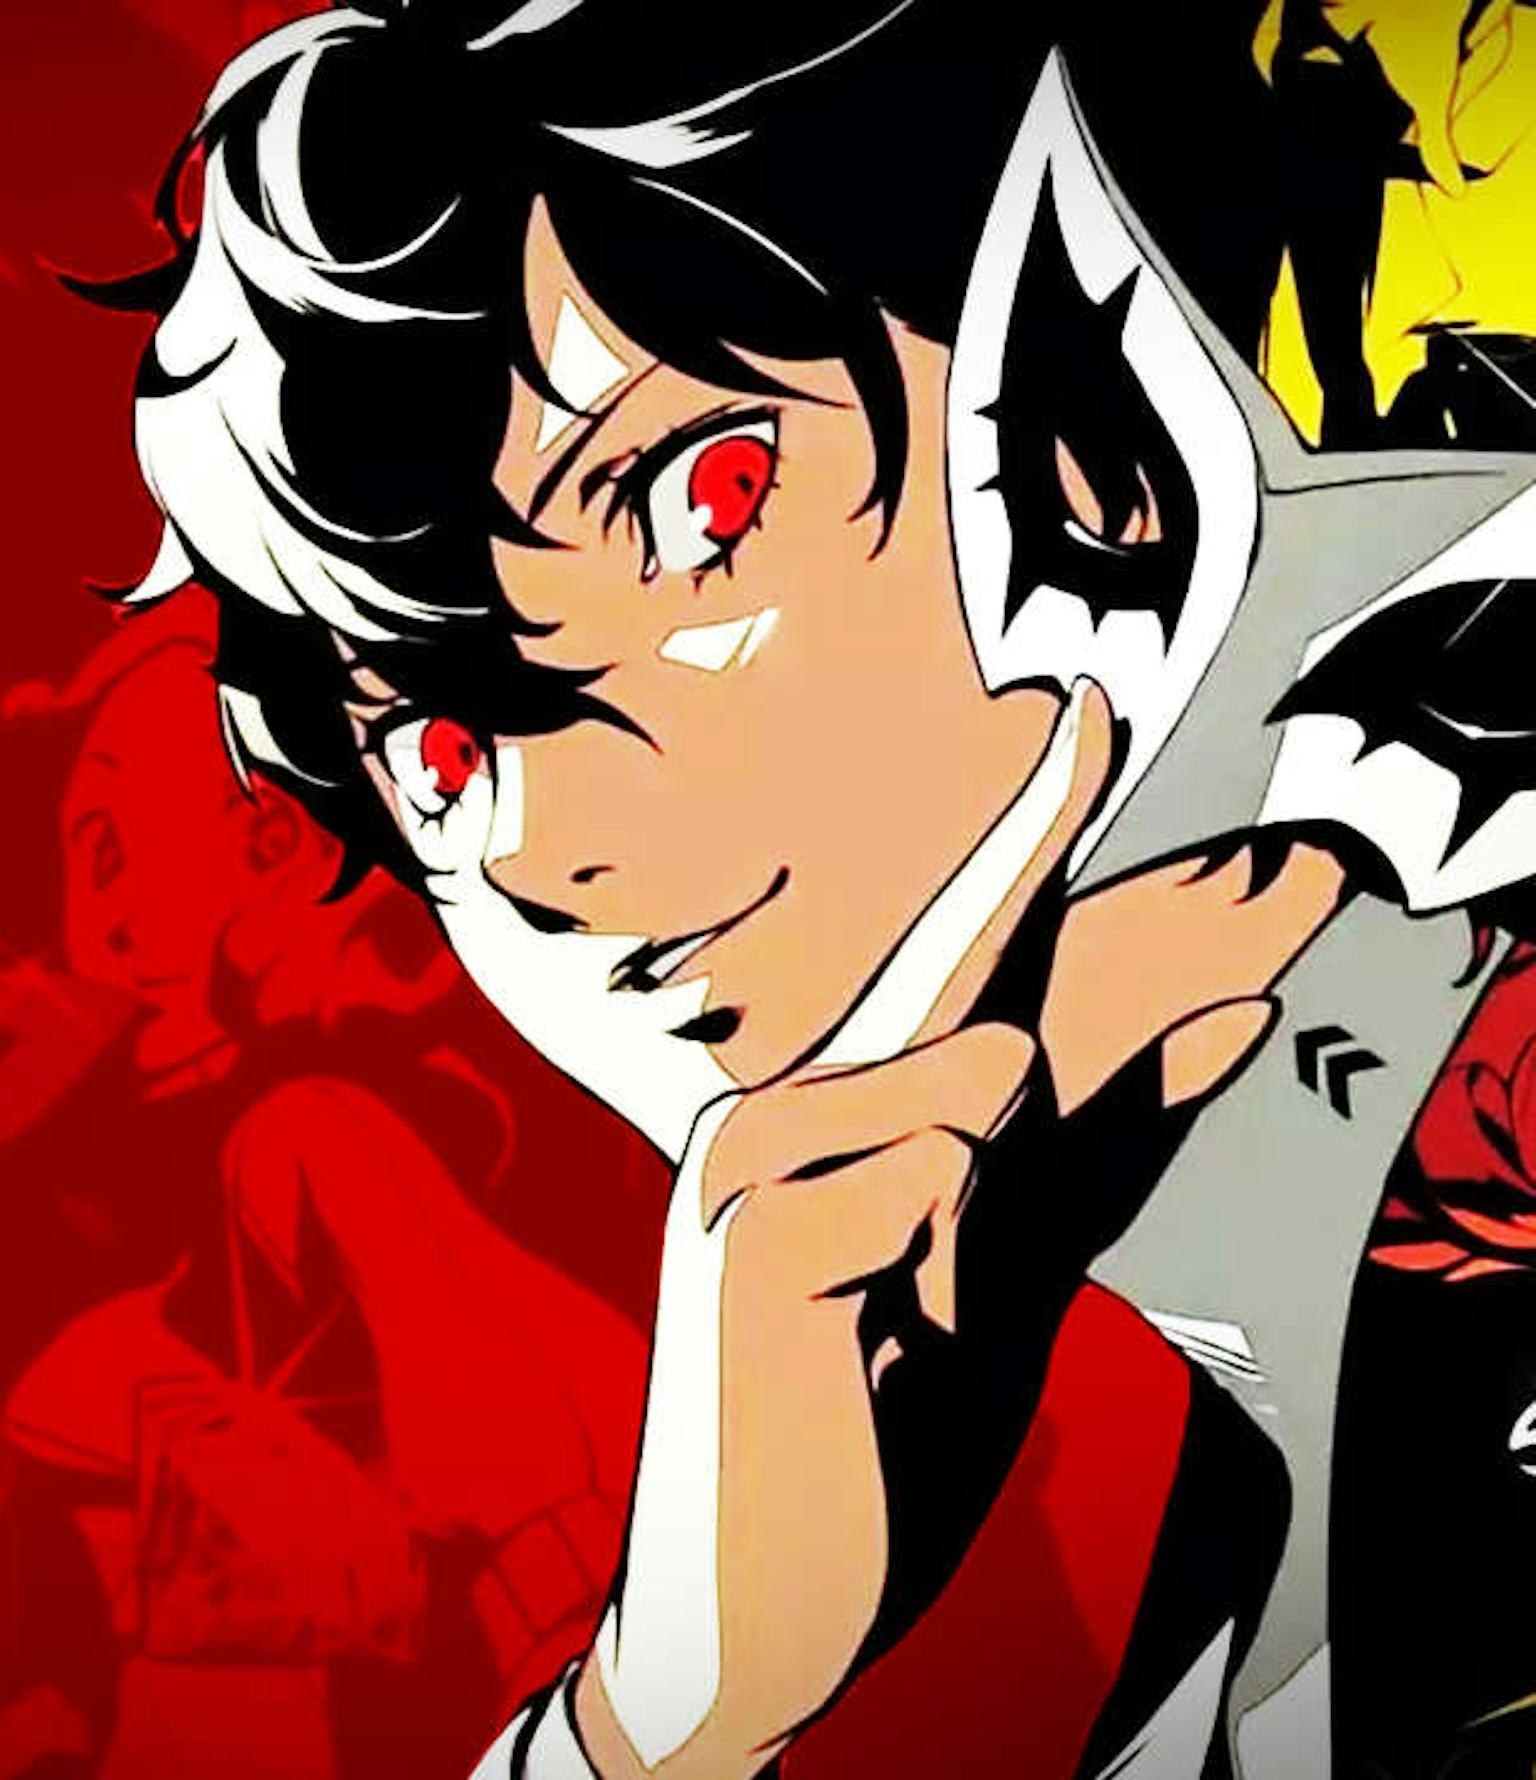 'Persona 5 Royal' has 3 gifts for your 'P5' save file: Here's how to ...